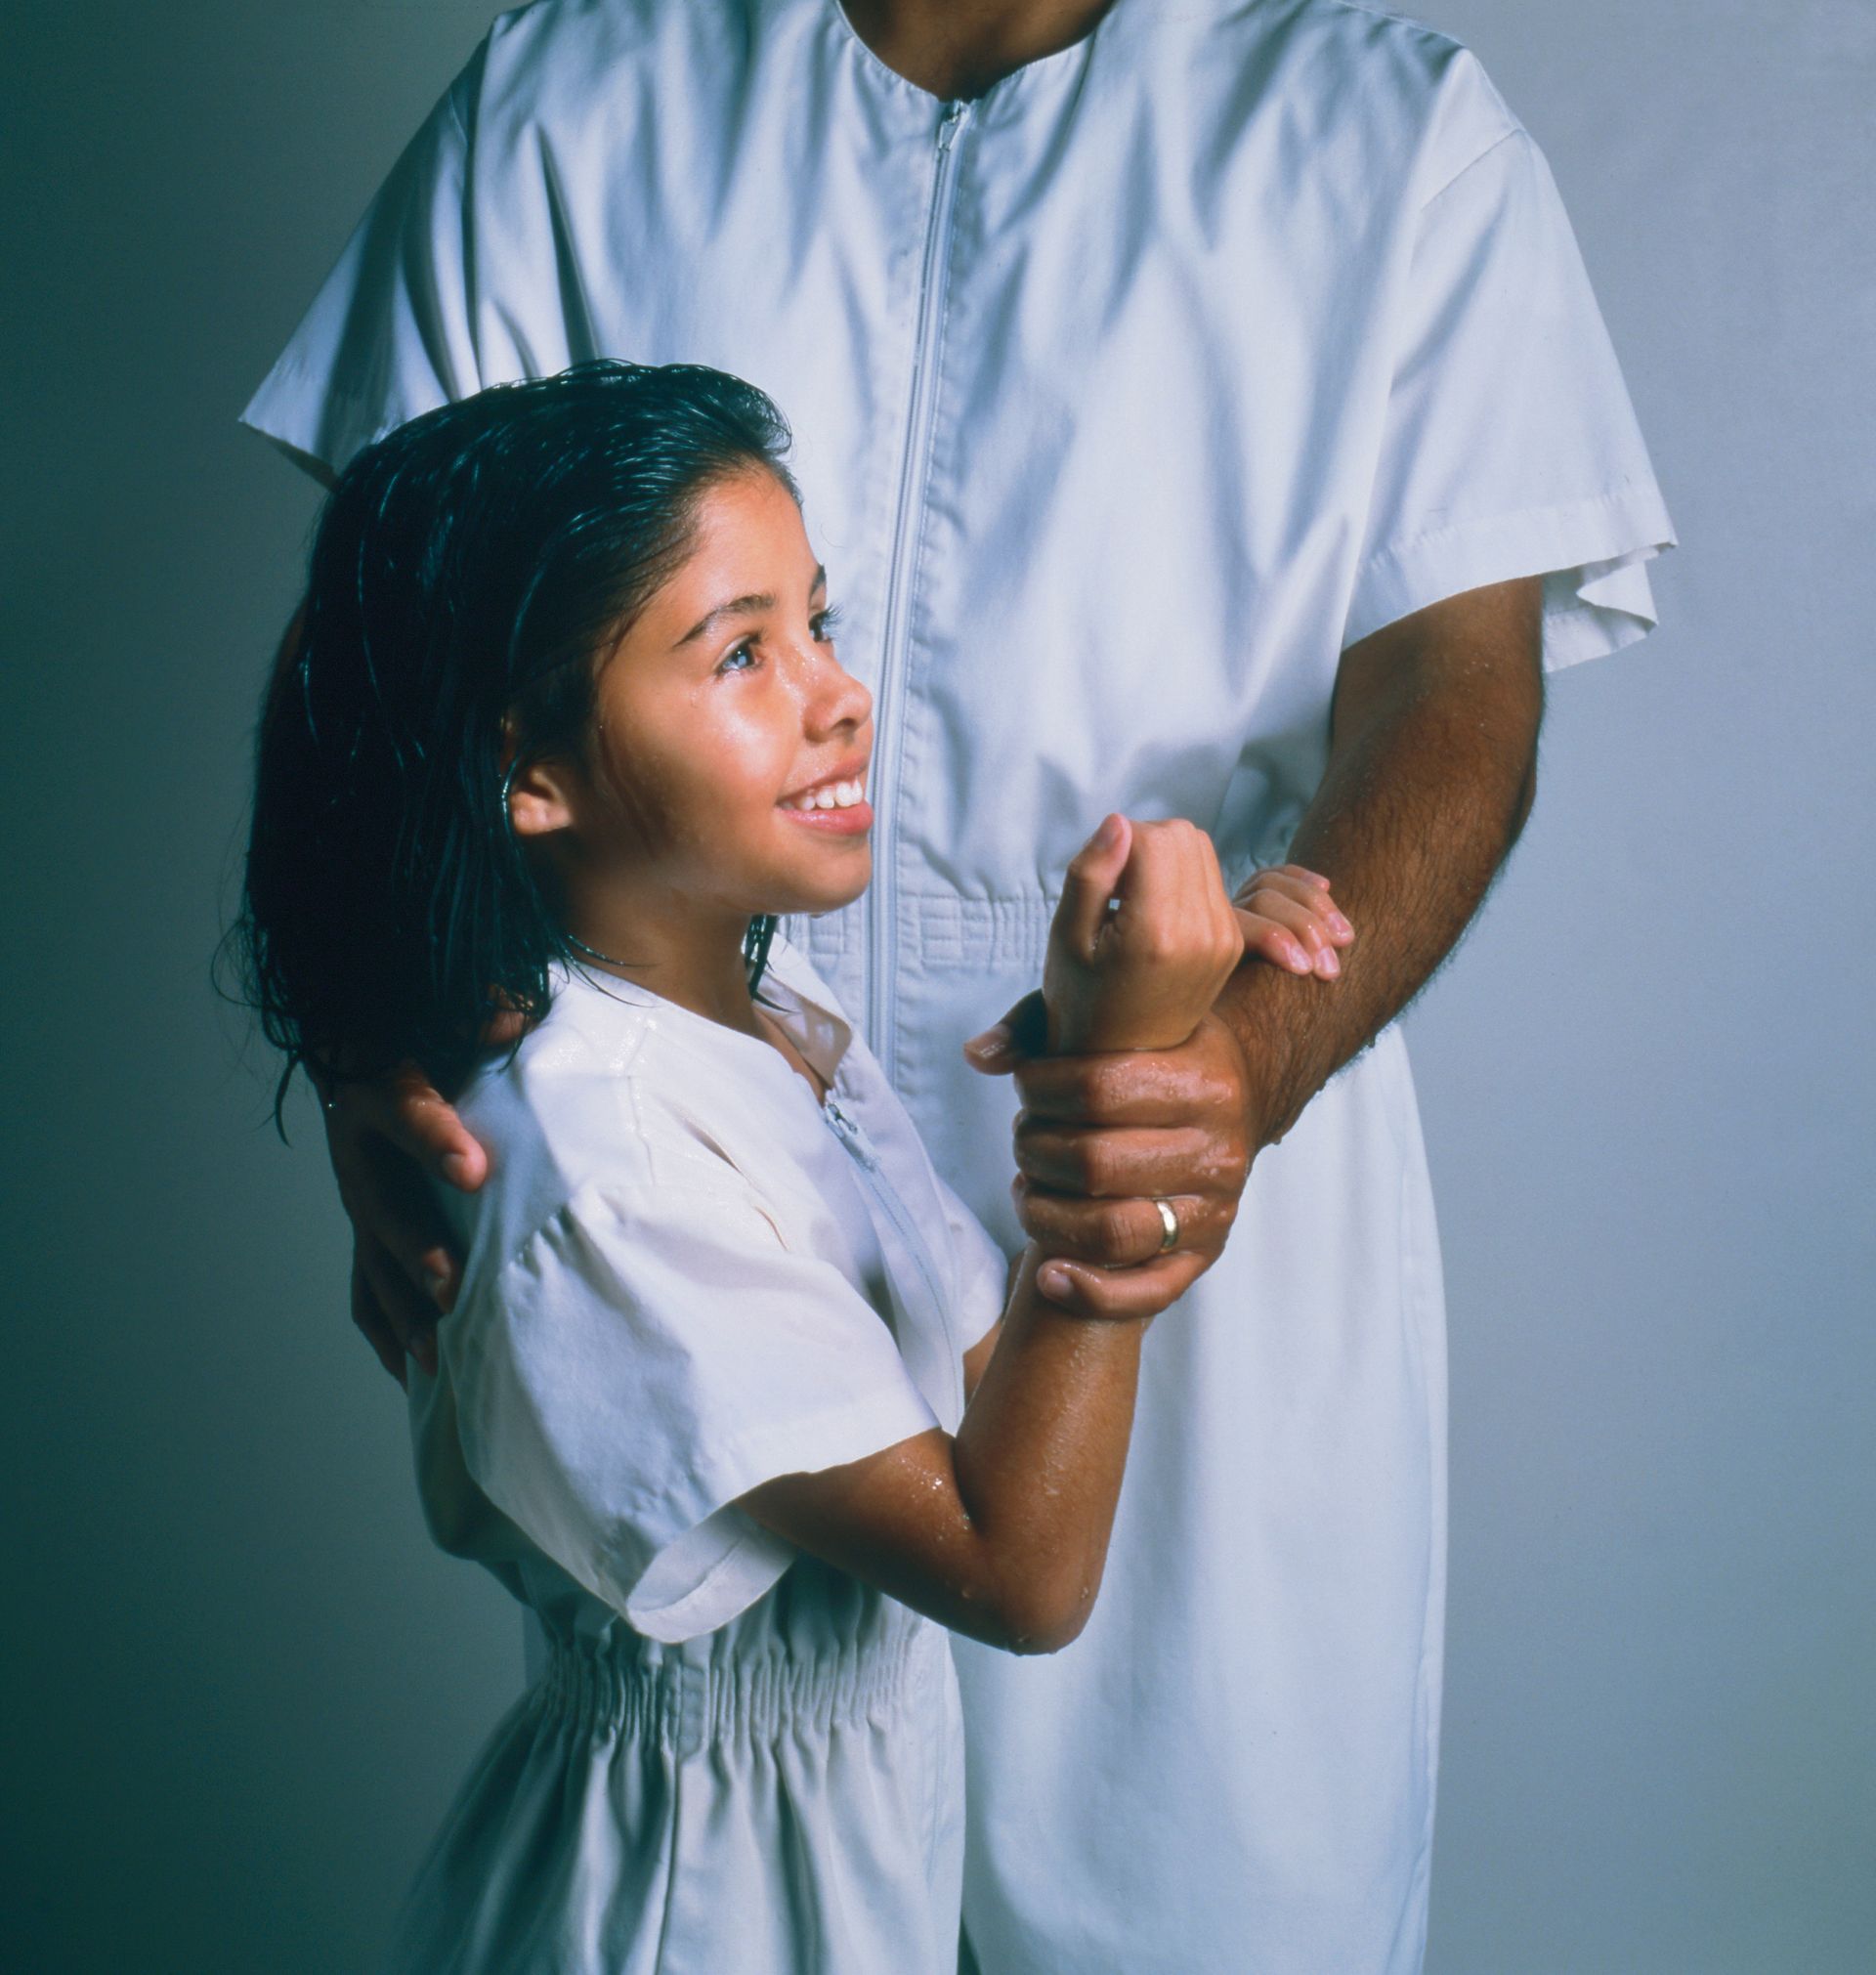 An eight-year-old girl and a priesthood holder standing together, in position for baptism.